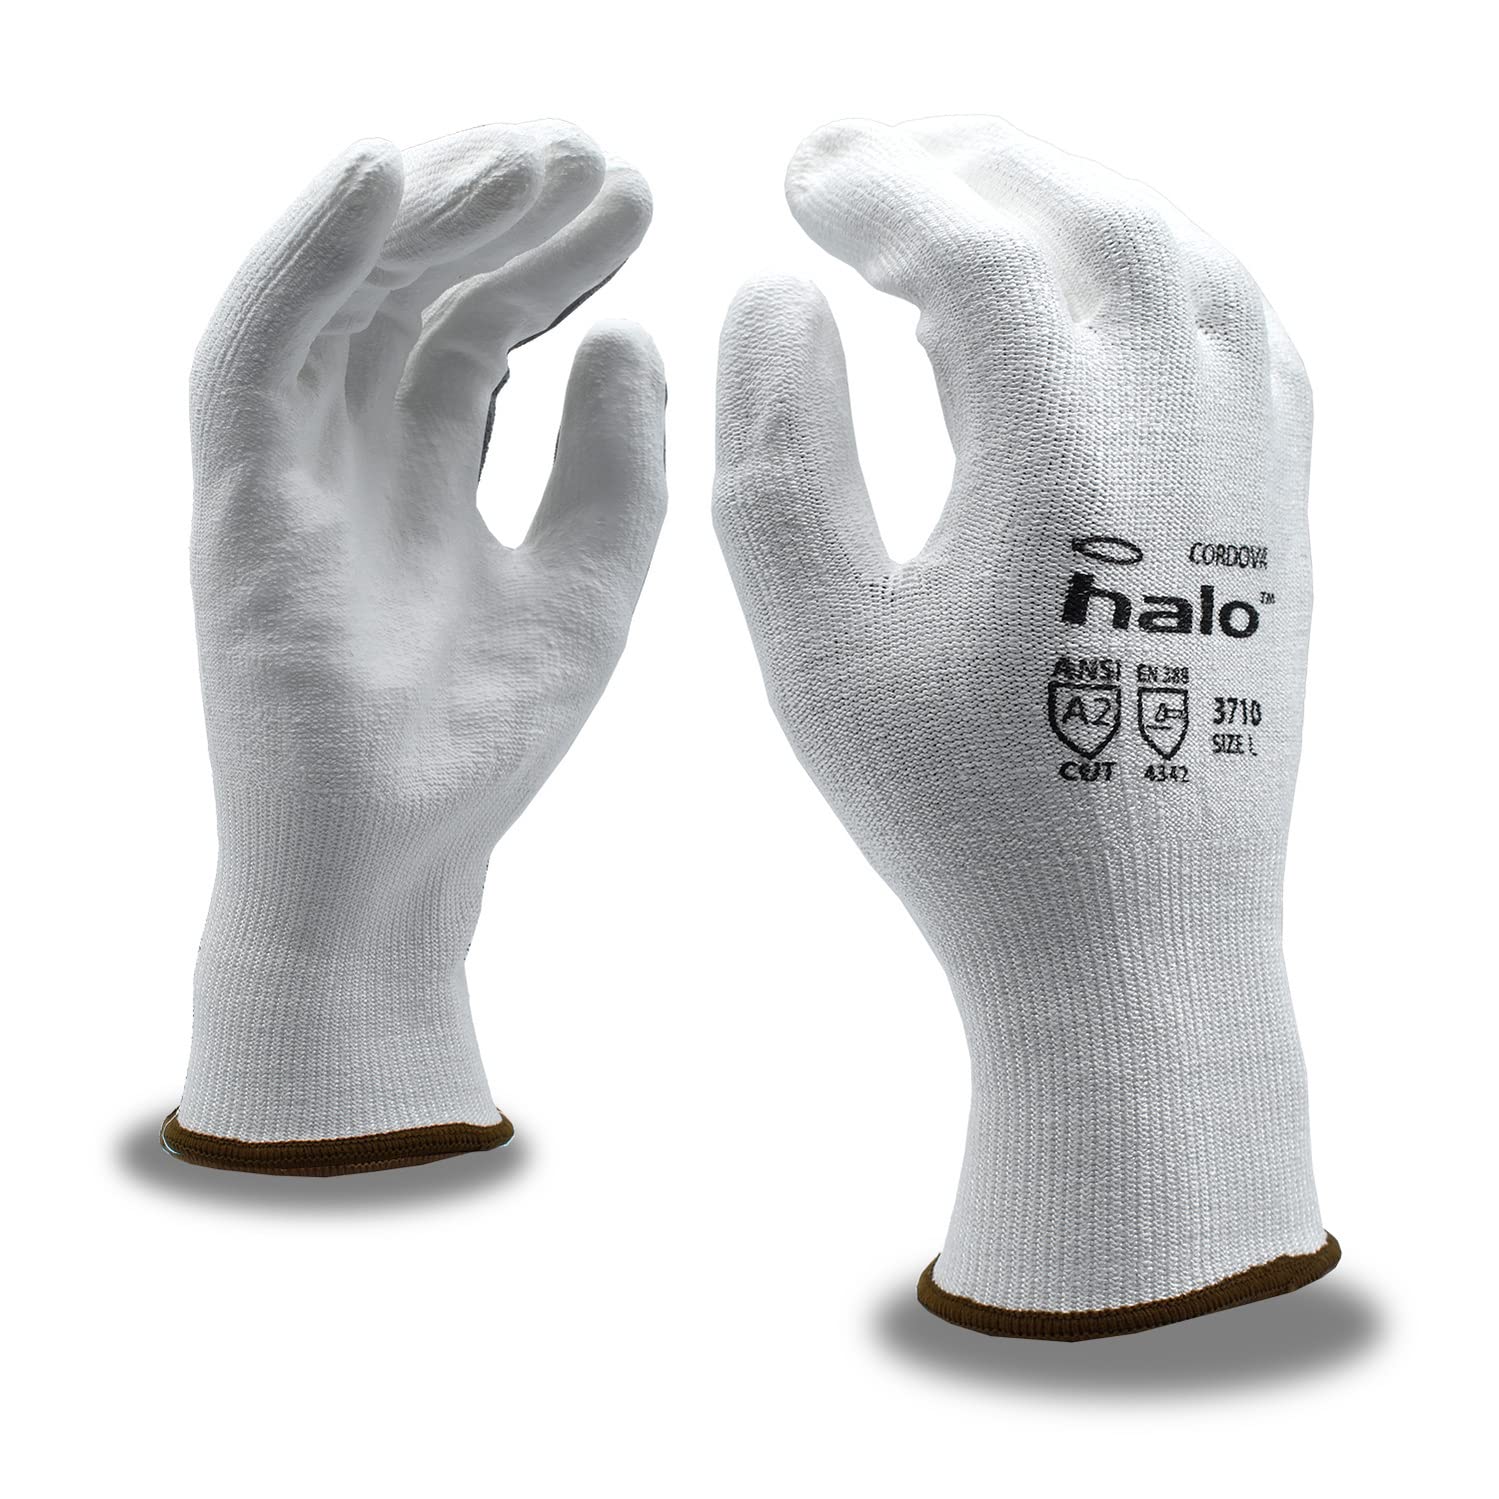 A pair of Halo brand white anti cut gloves are displayed